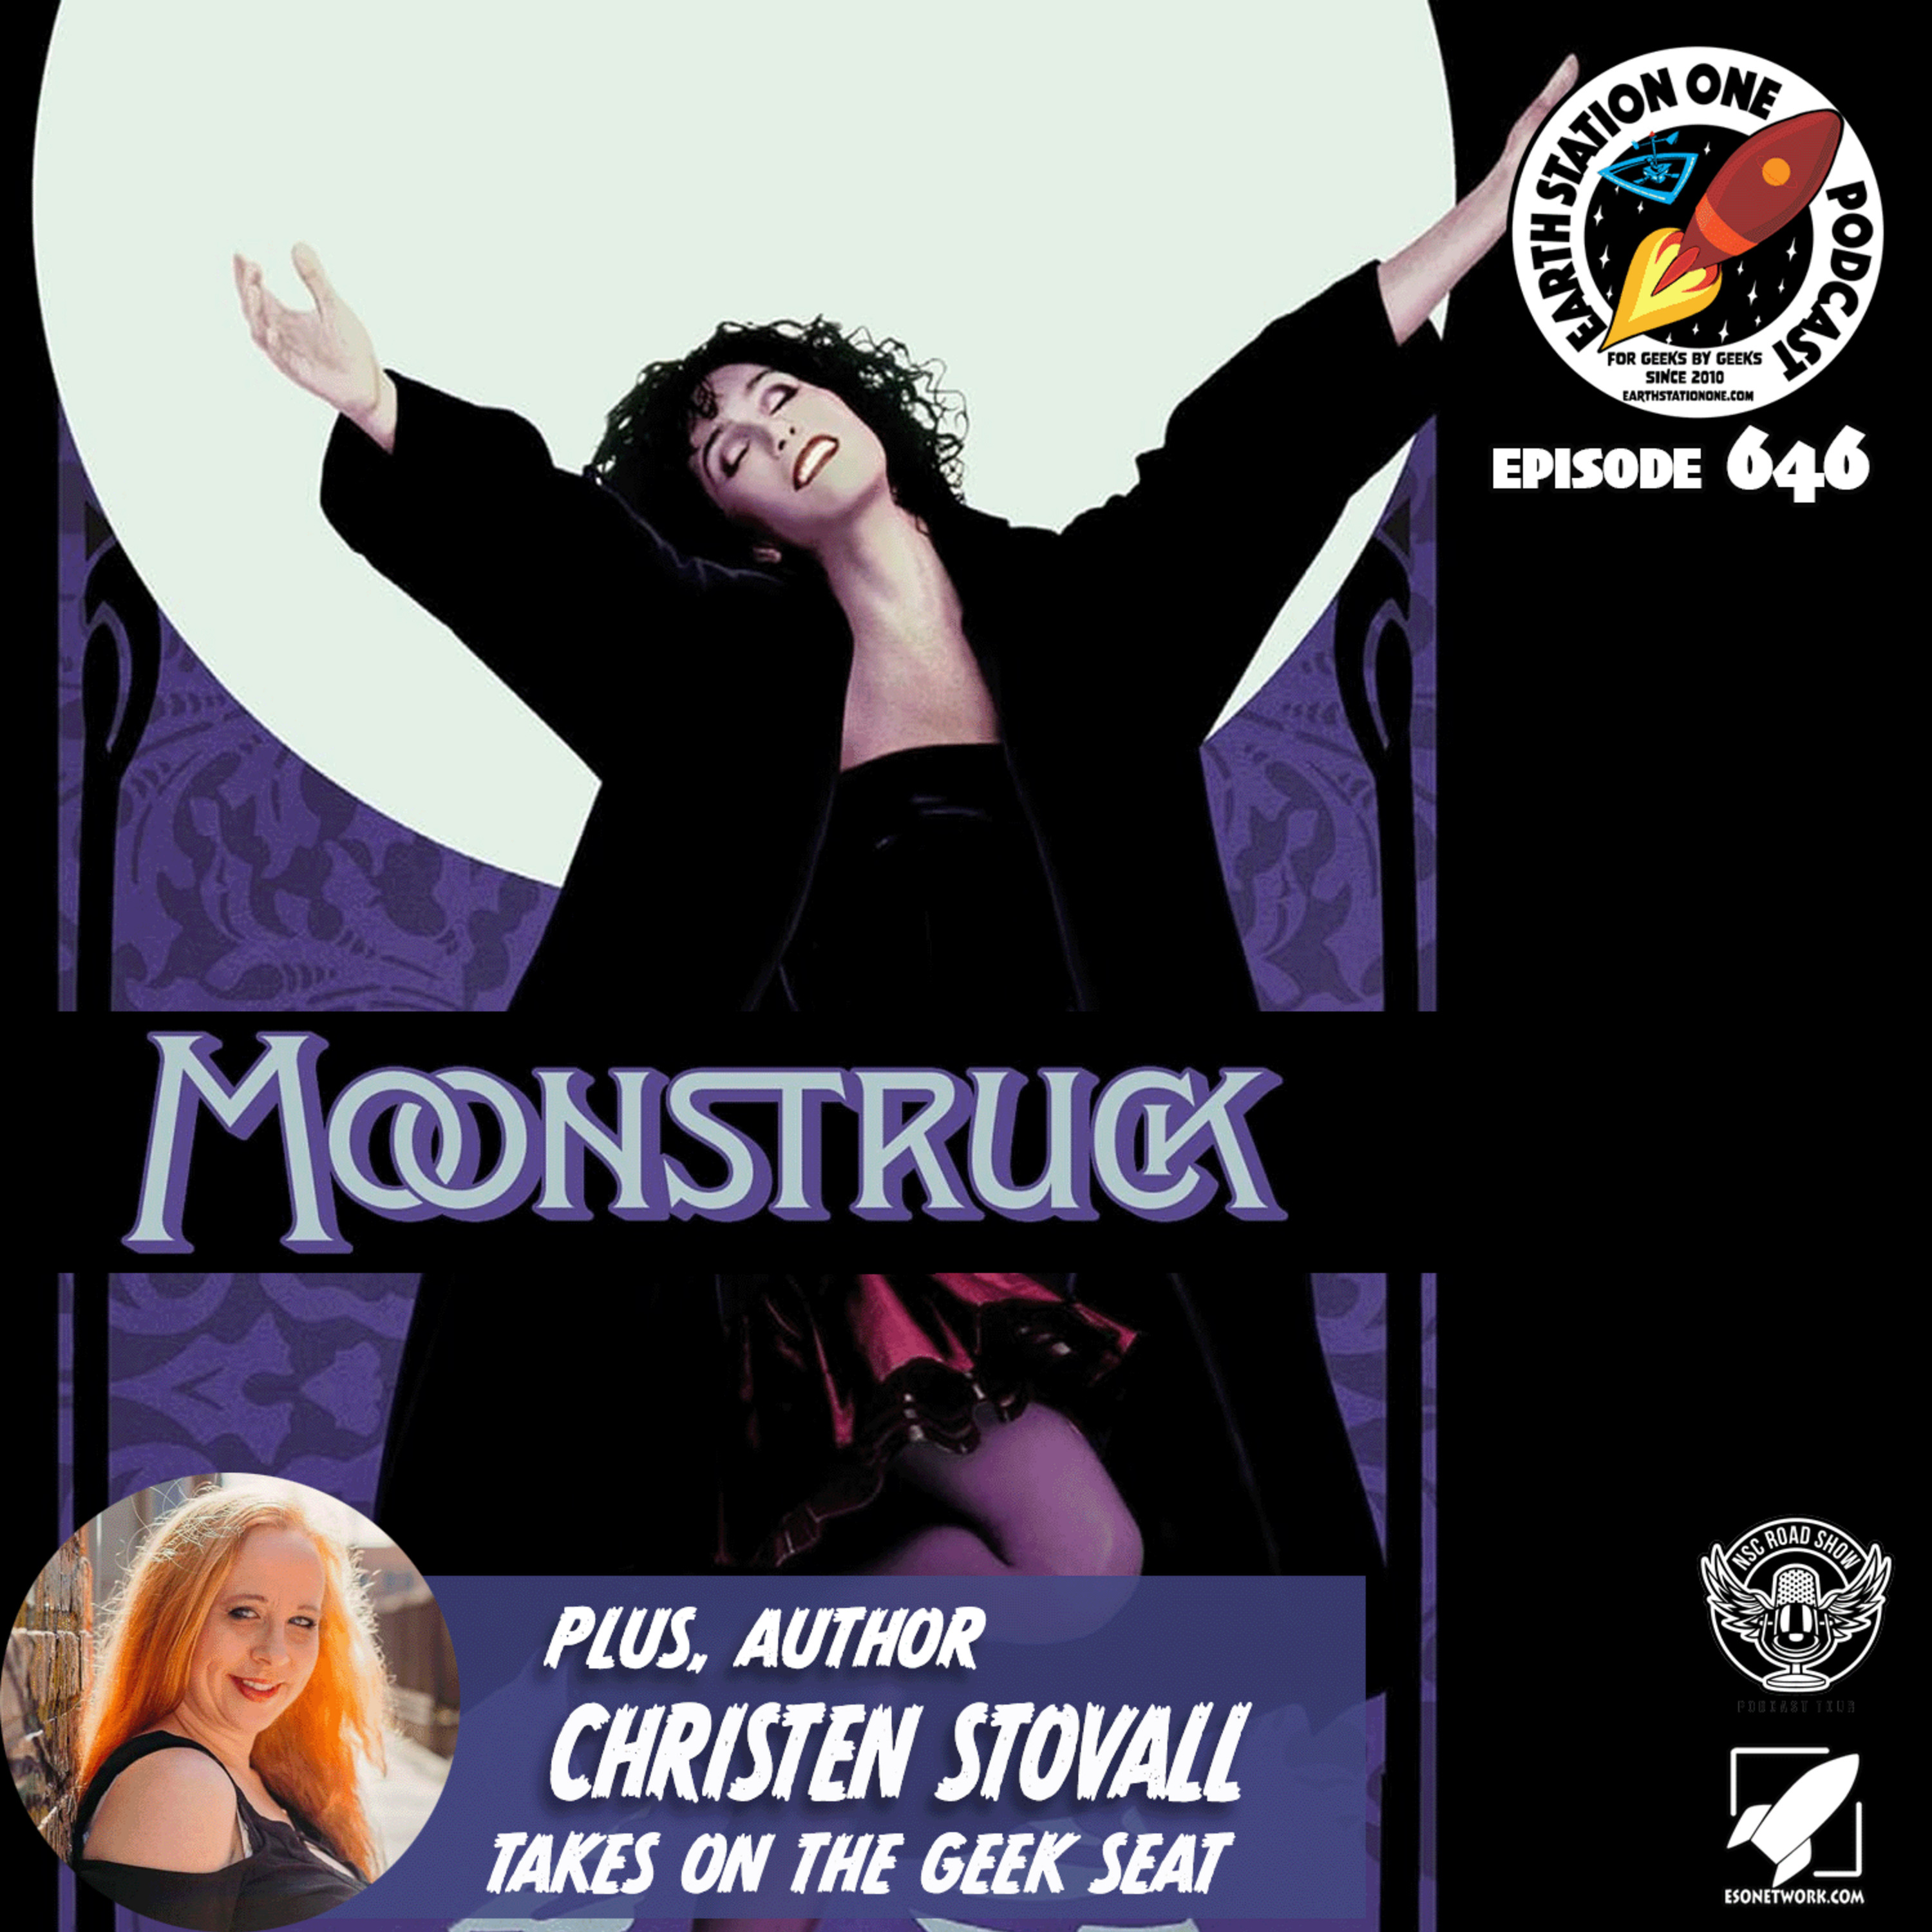 The Earth Station One Podcast - Classic Movie Review: Moonstruck